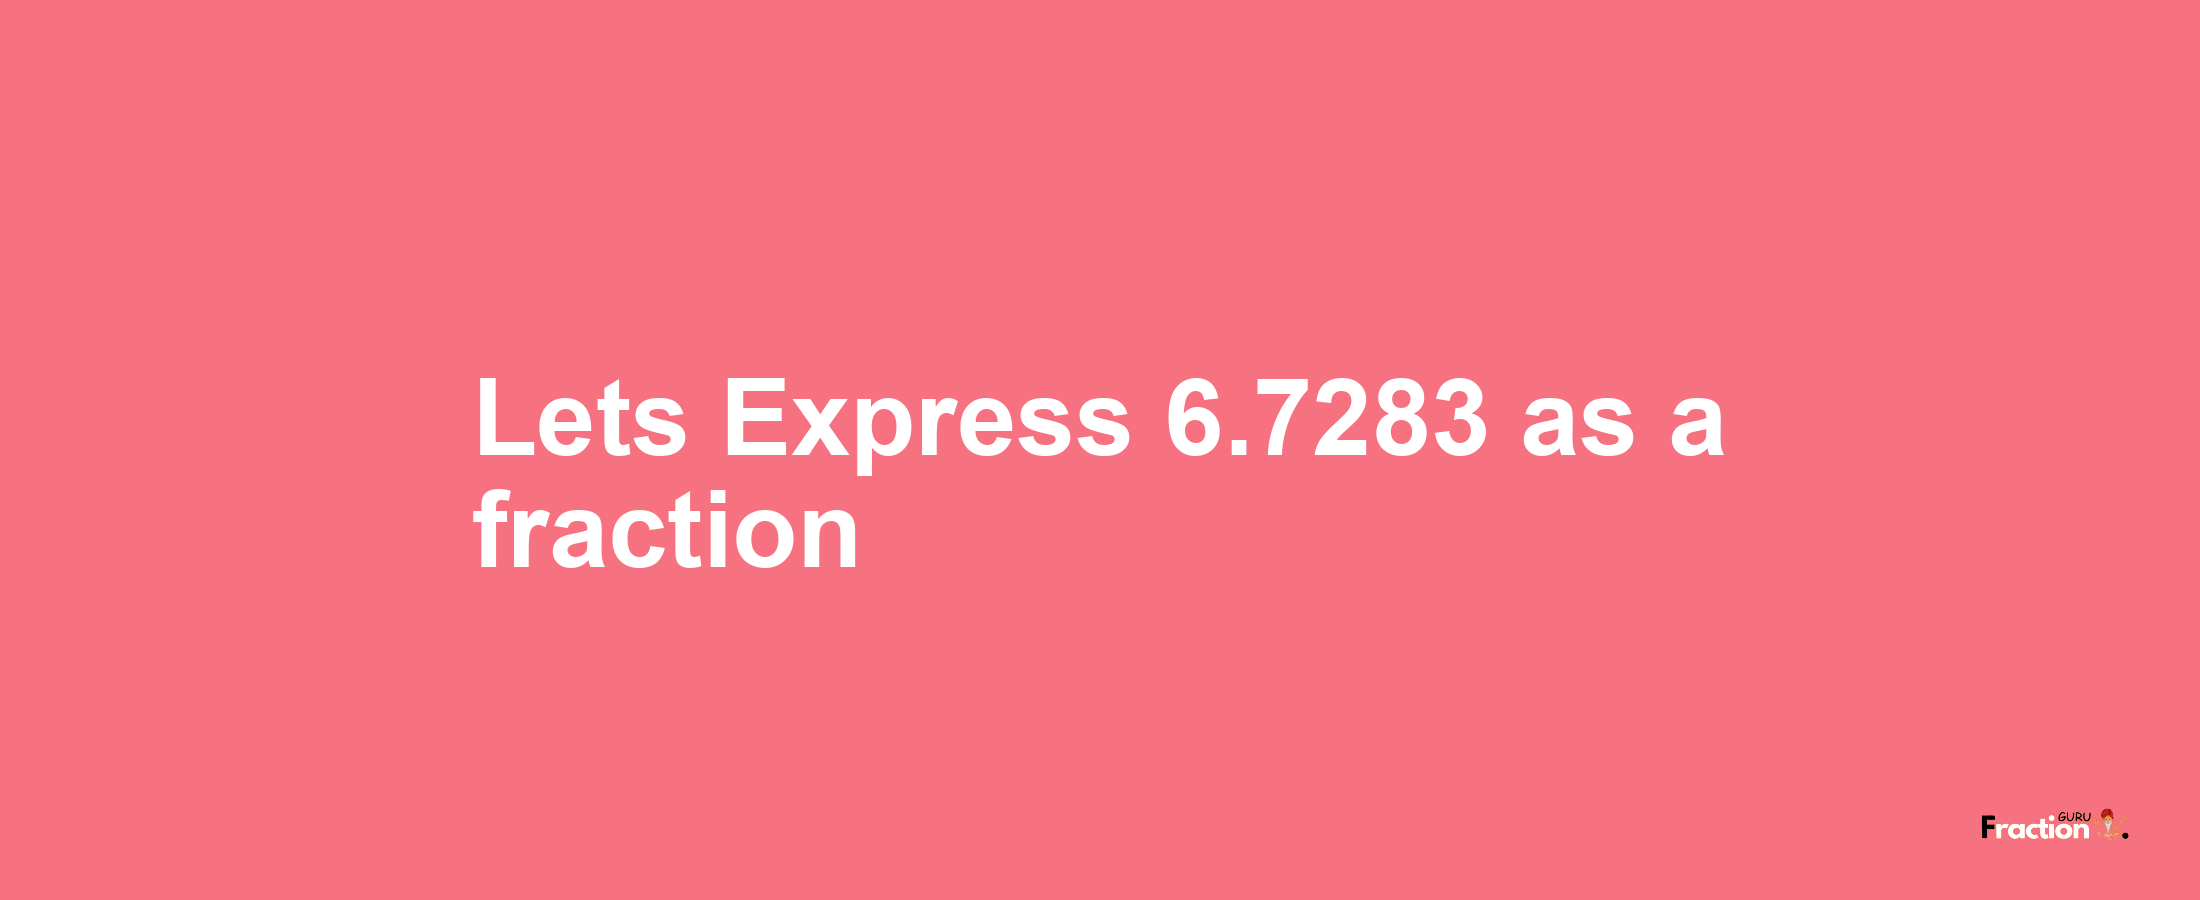 Lets Express 6.7283 as afraction